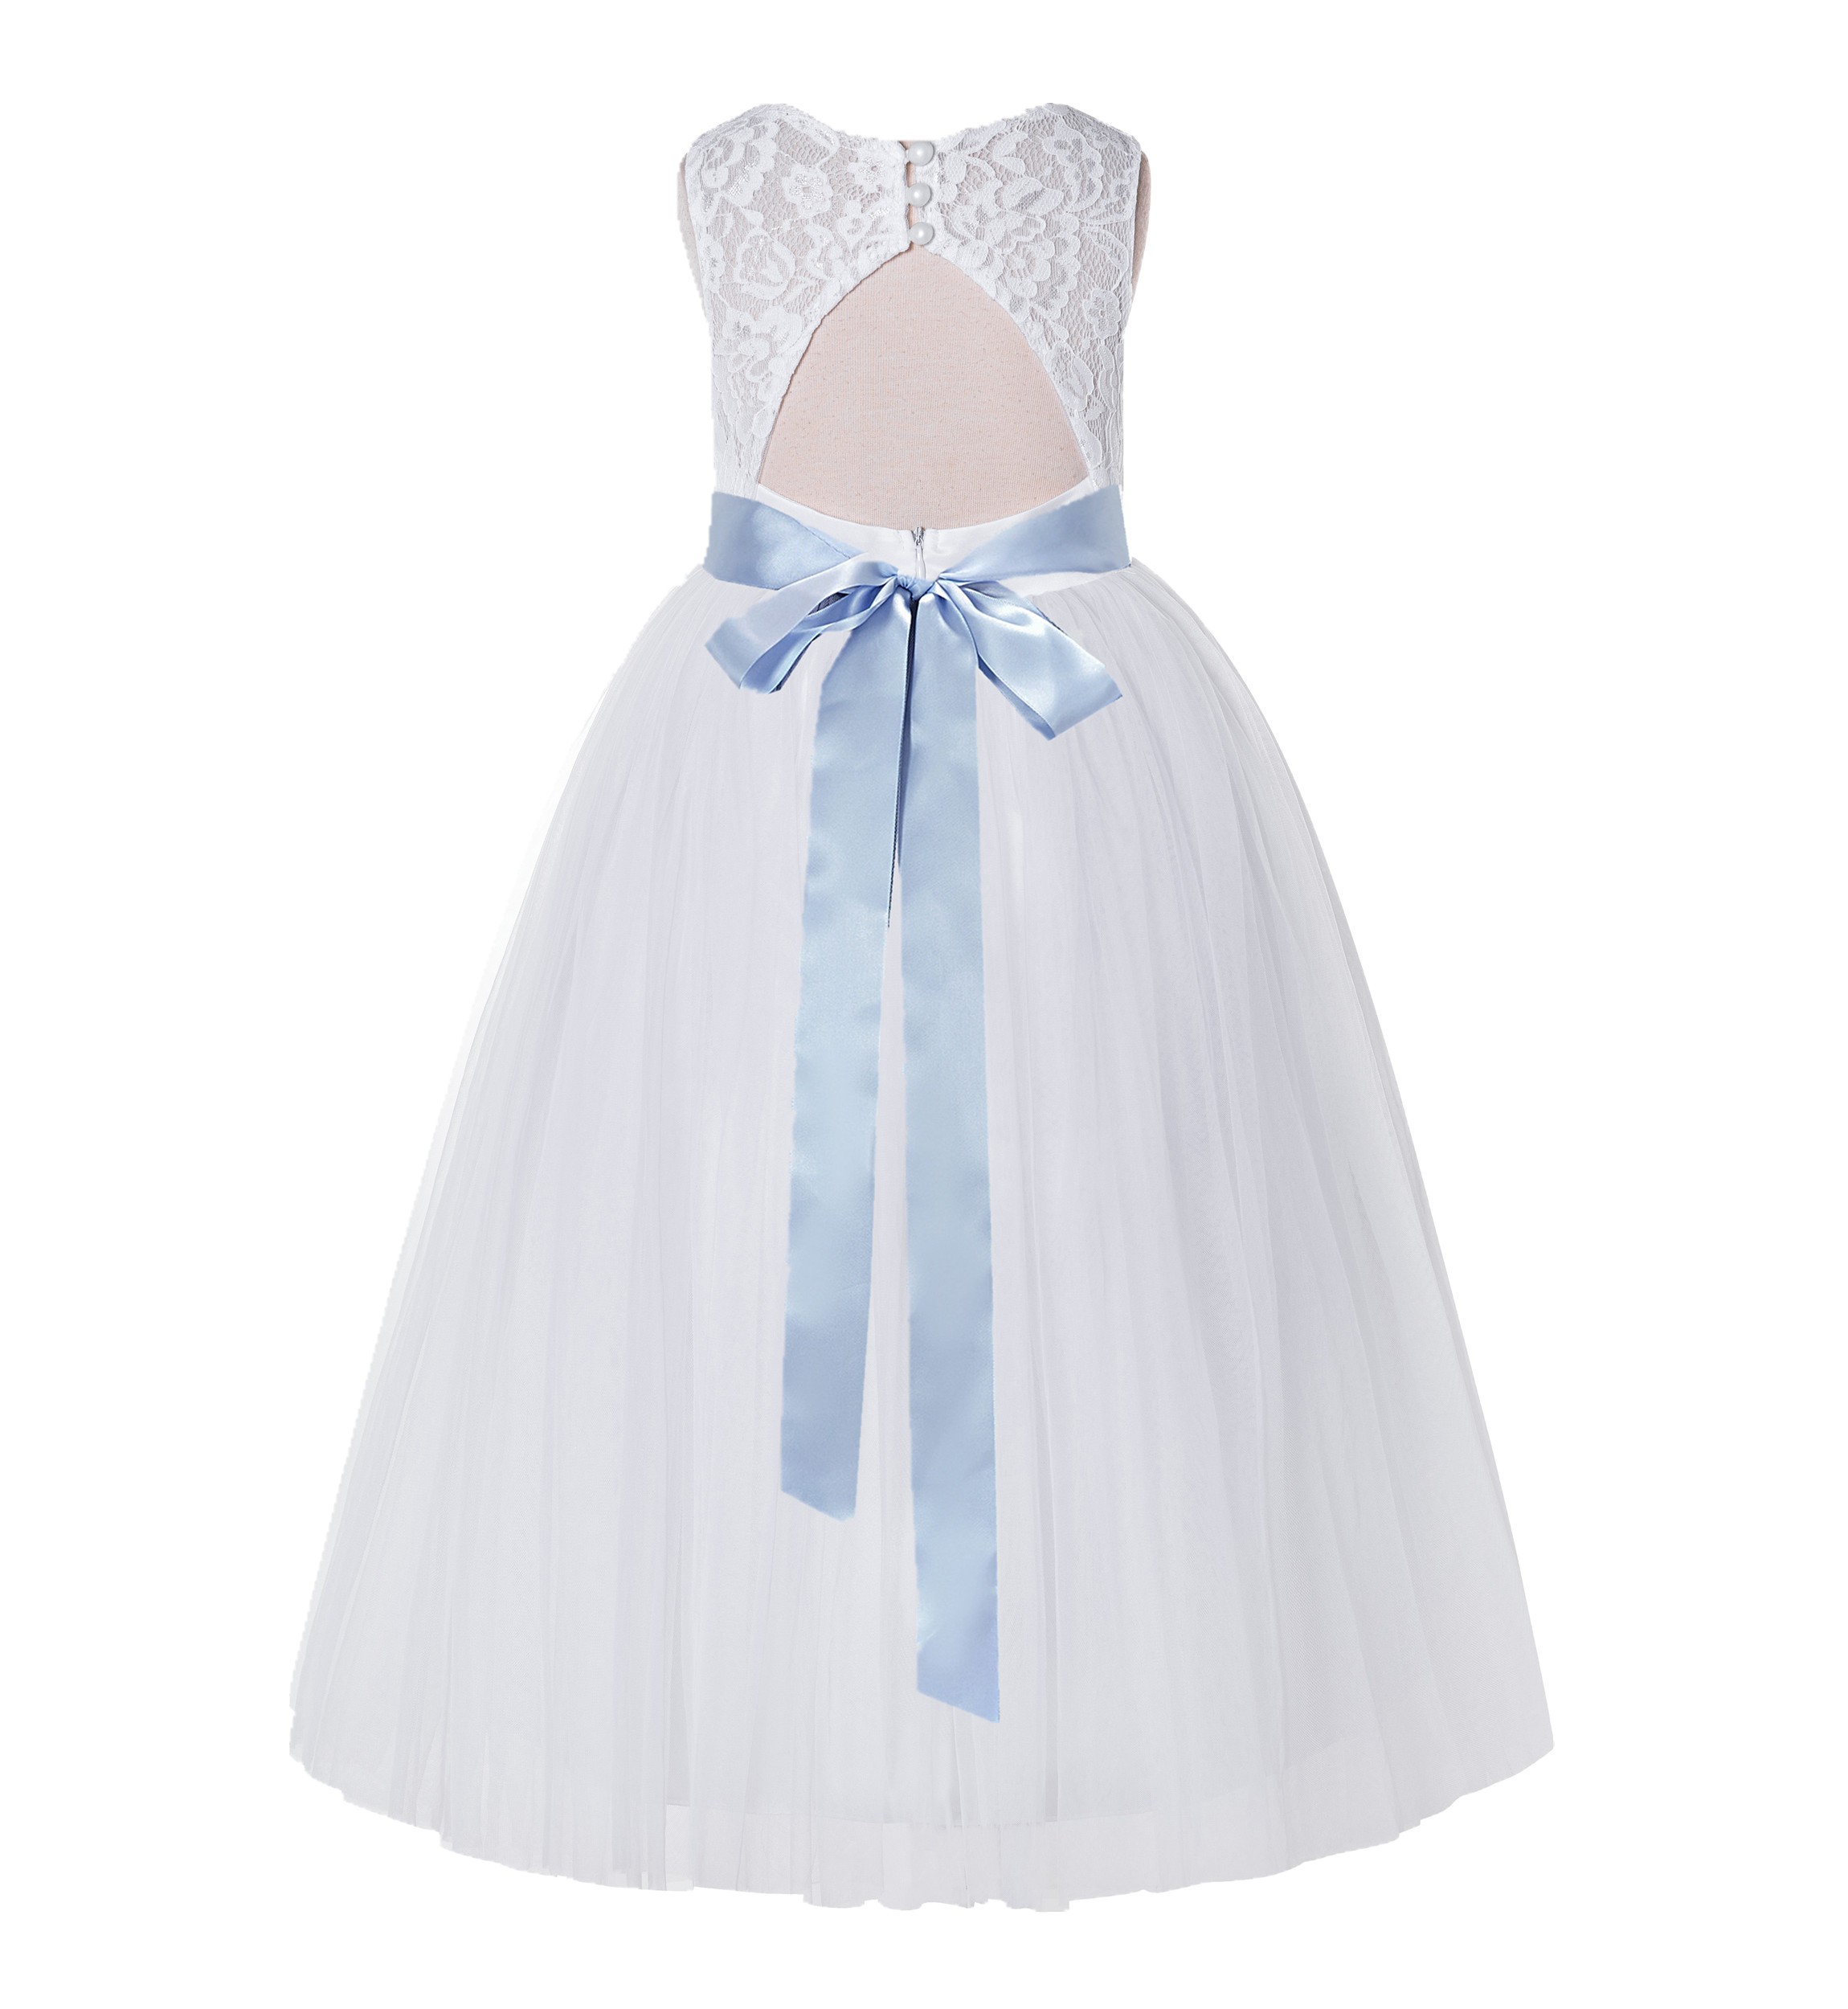 White / Dusty Blue Tulle A-Line Lace Flower Girl Dress 178R3